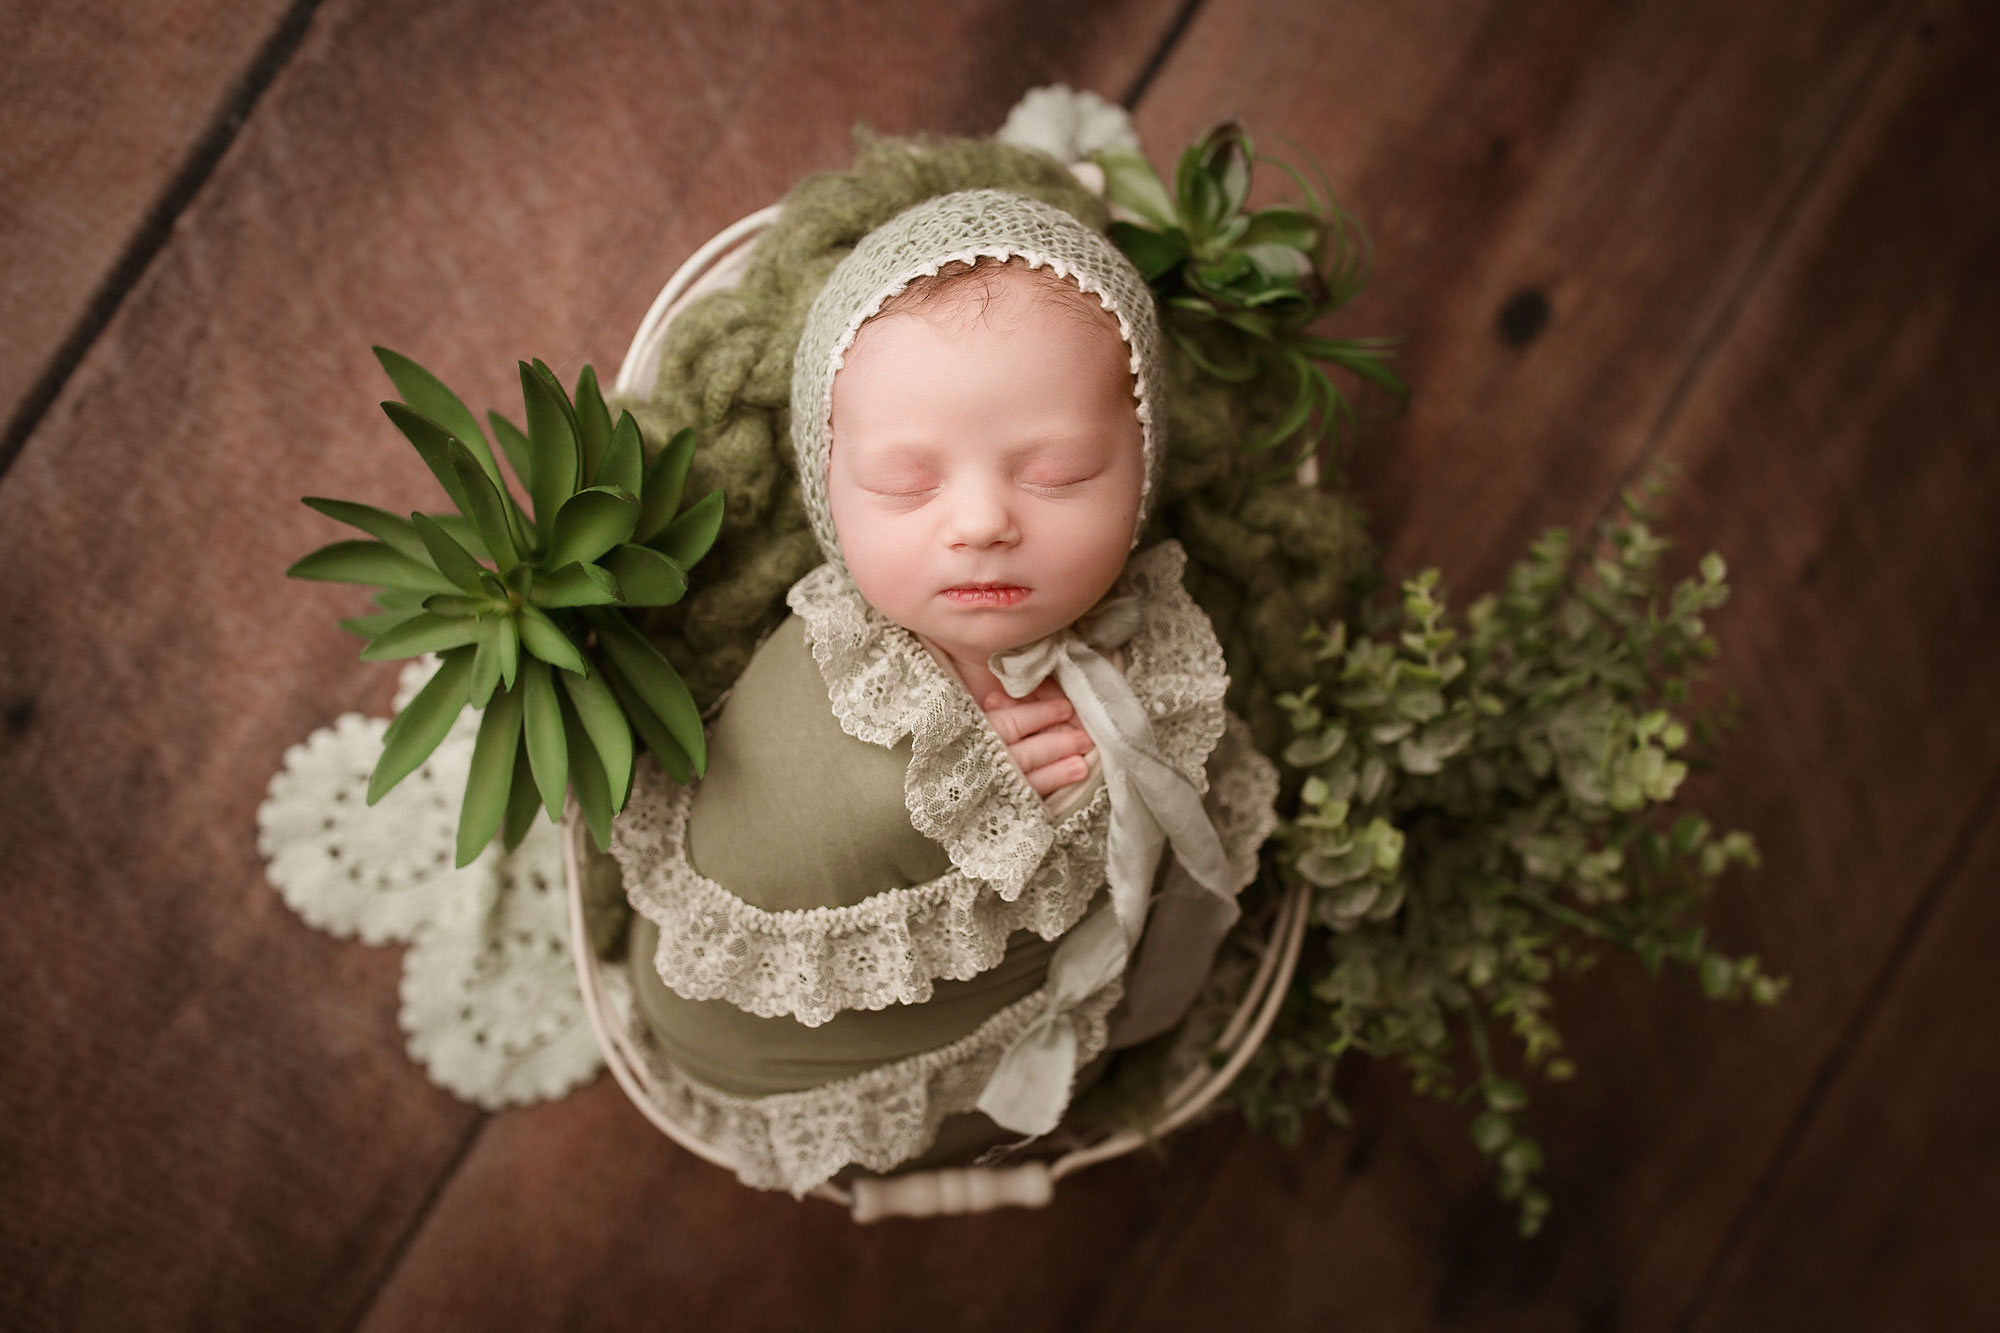 baby girl portraits raritan nj, baby girl in olive green swaddle asleep in bucket with greenery against wood backdrop